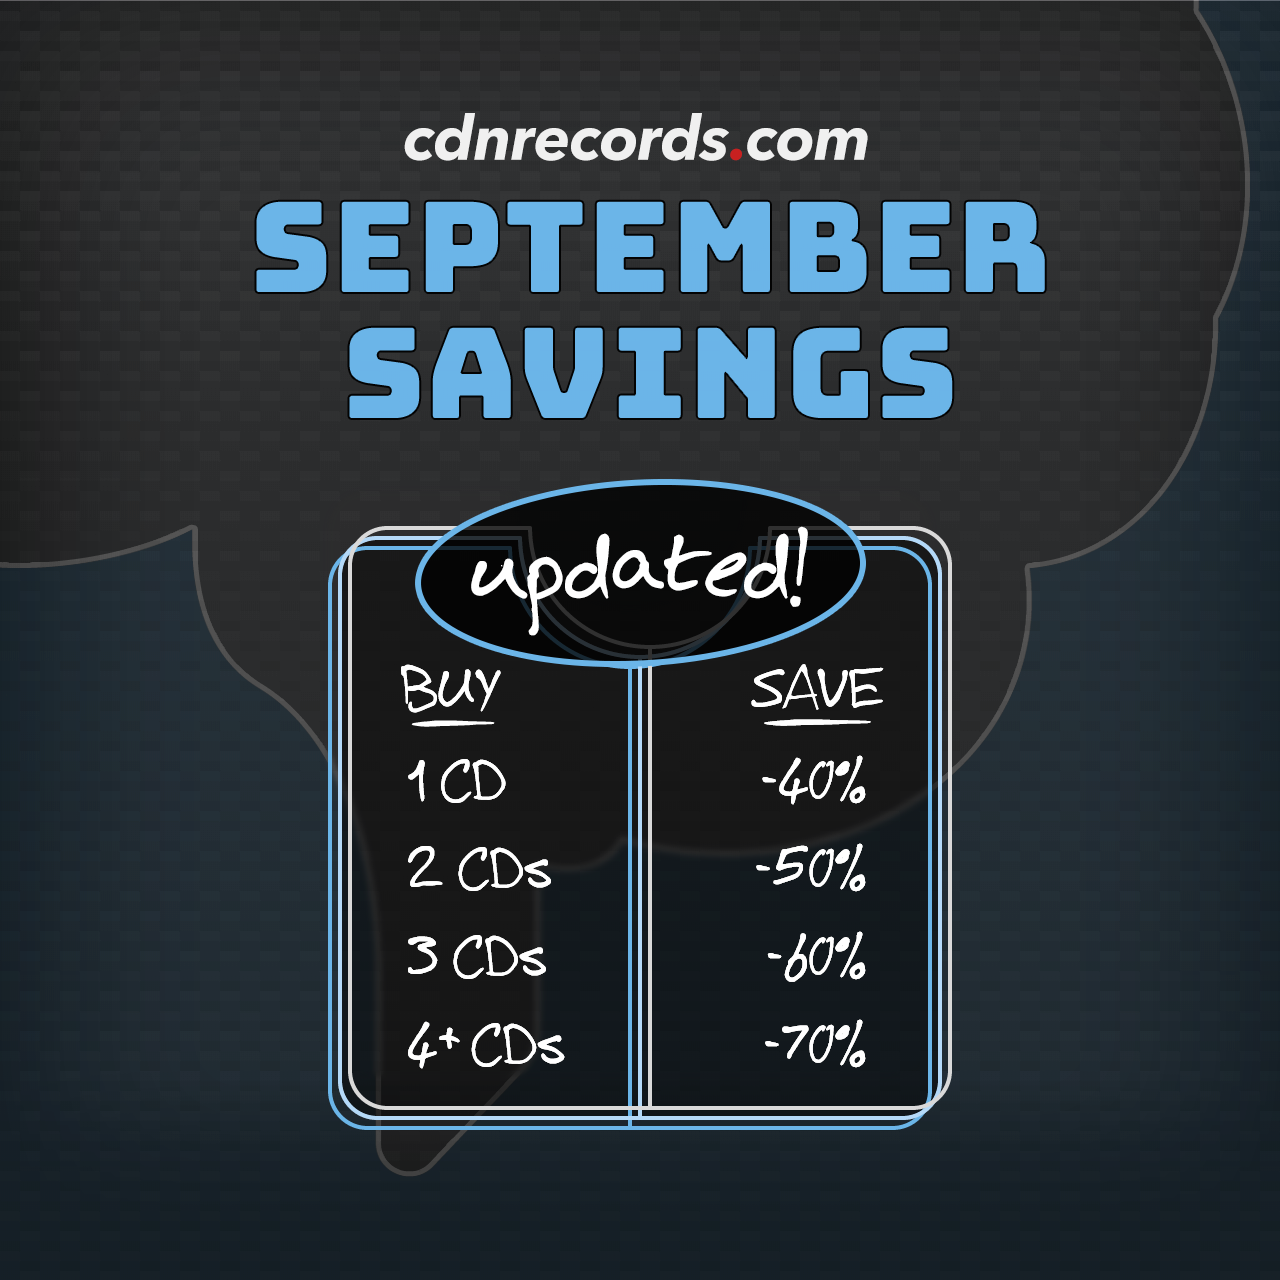 promo graphic for updated september savings on CDs